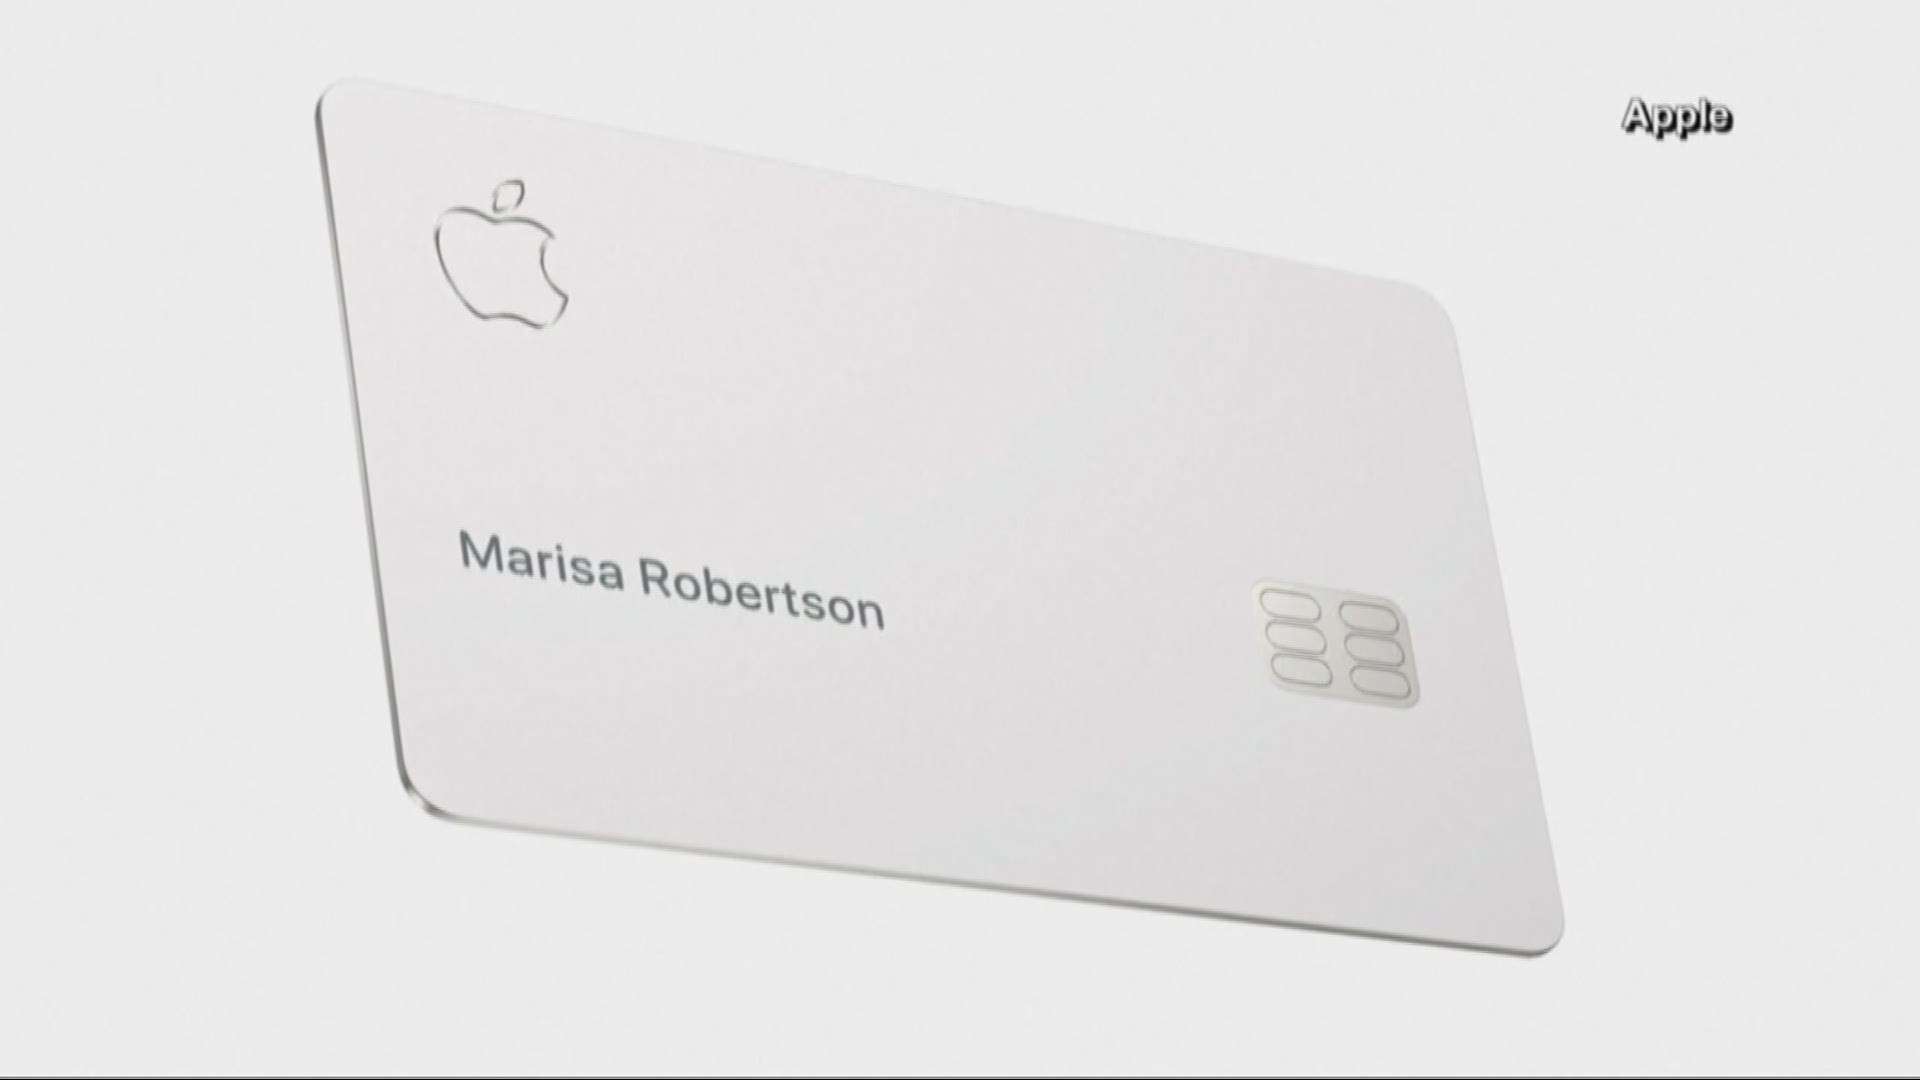 Apple's credit card is now available to use. Apple is accepting applications through the wallet app and users can use their card right away. It has no annual, late or over-the-limit fees. But there is a catch.